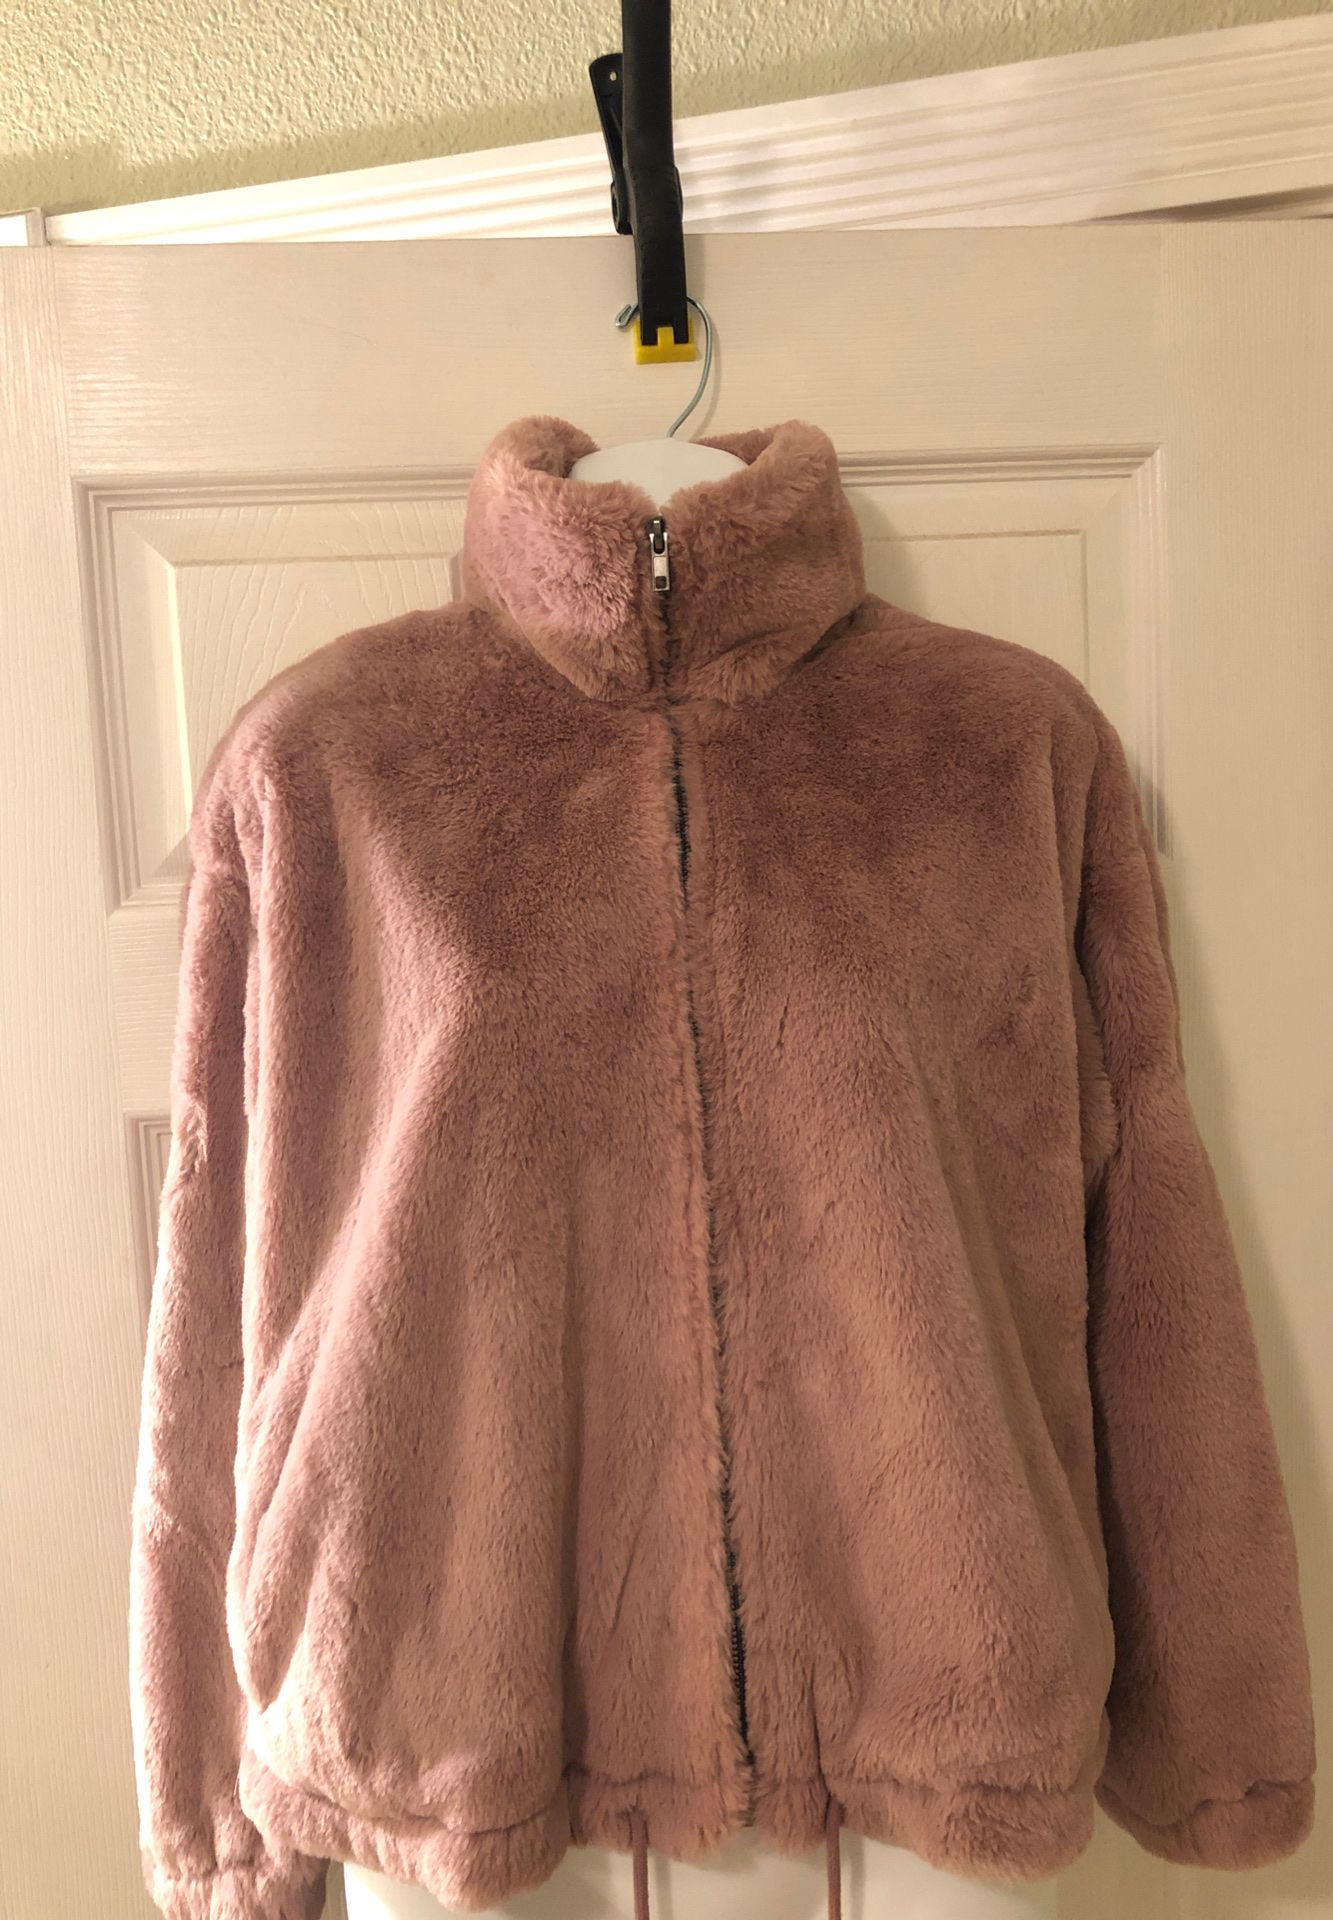 Women’s rose pink faux fur zip up jacket with drawstring waist size small